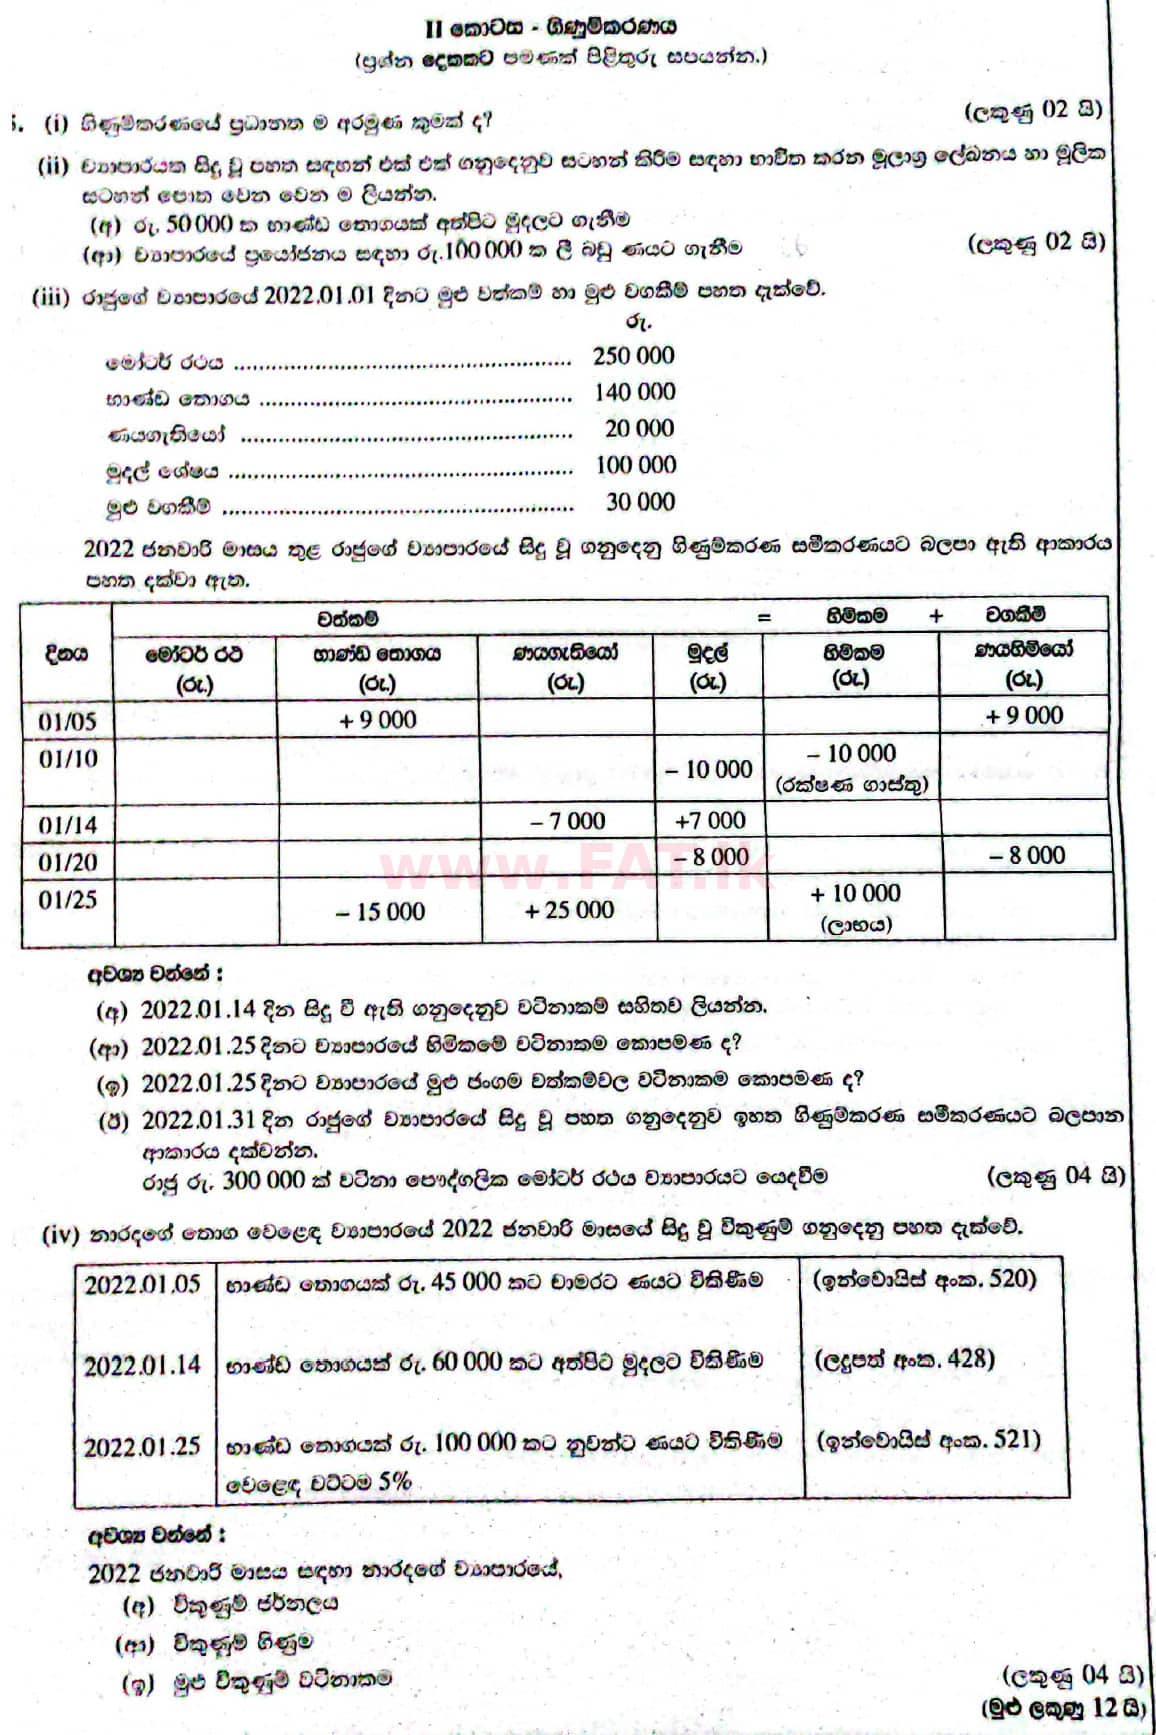 National Syllabus : Ordinary Level (O/L) Business and Accounting Studies - 2021 May - Paper II (සිංහල Medium) 5 1